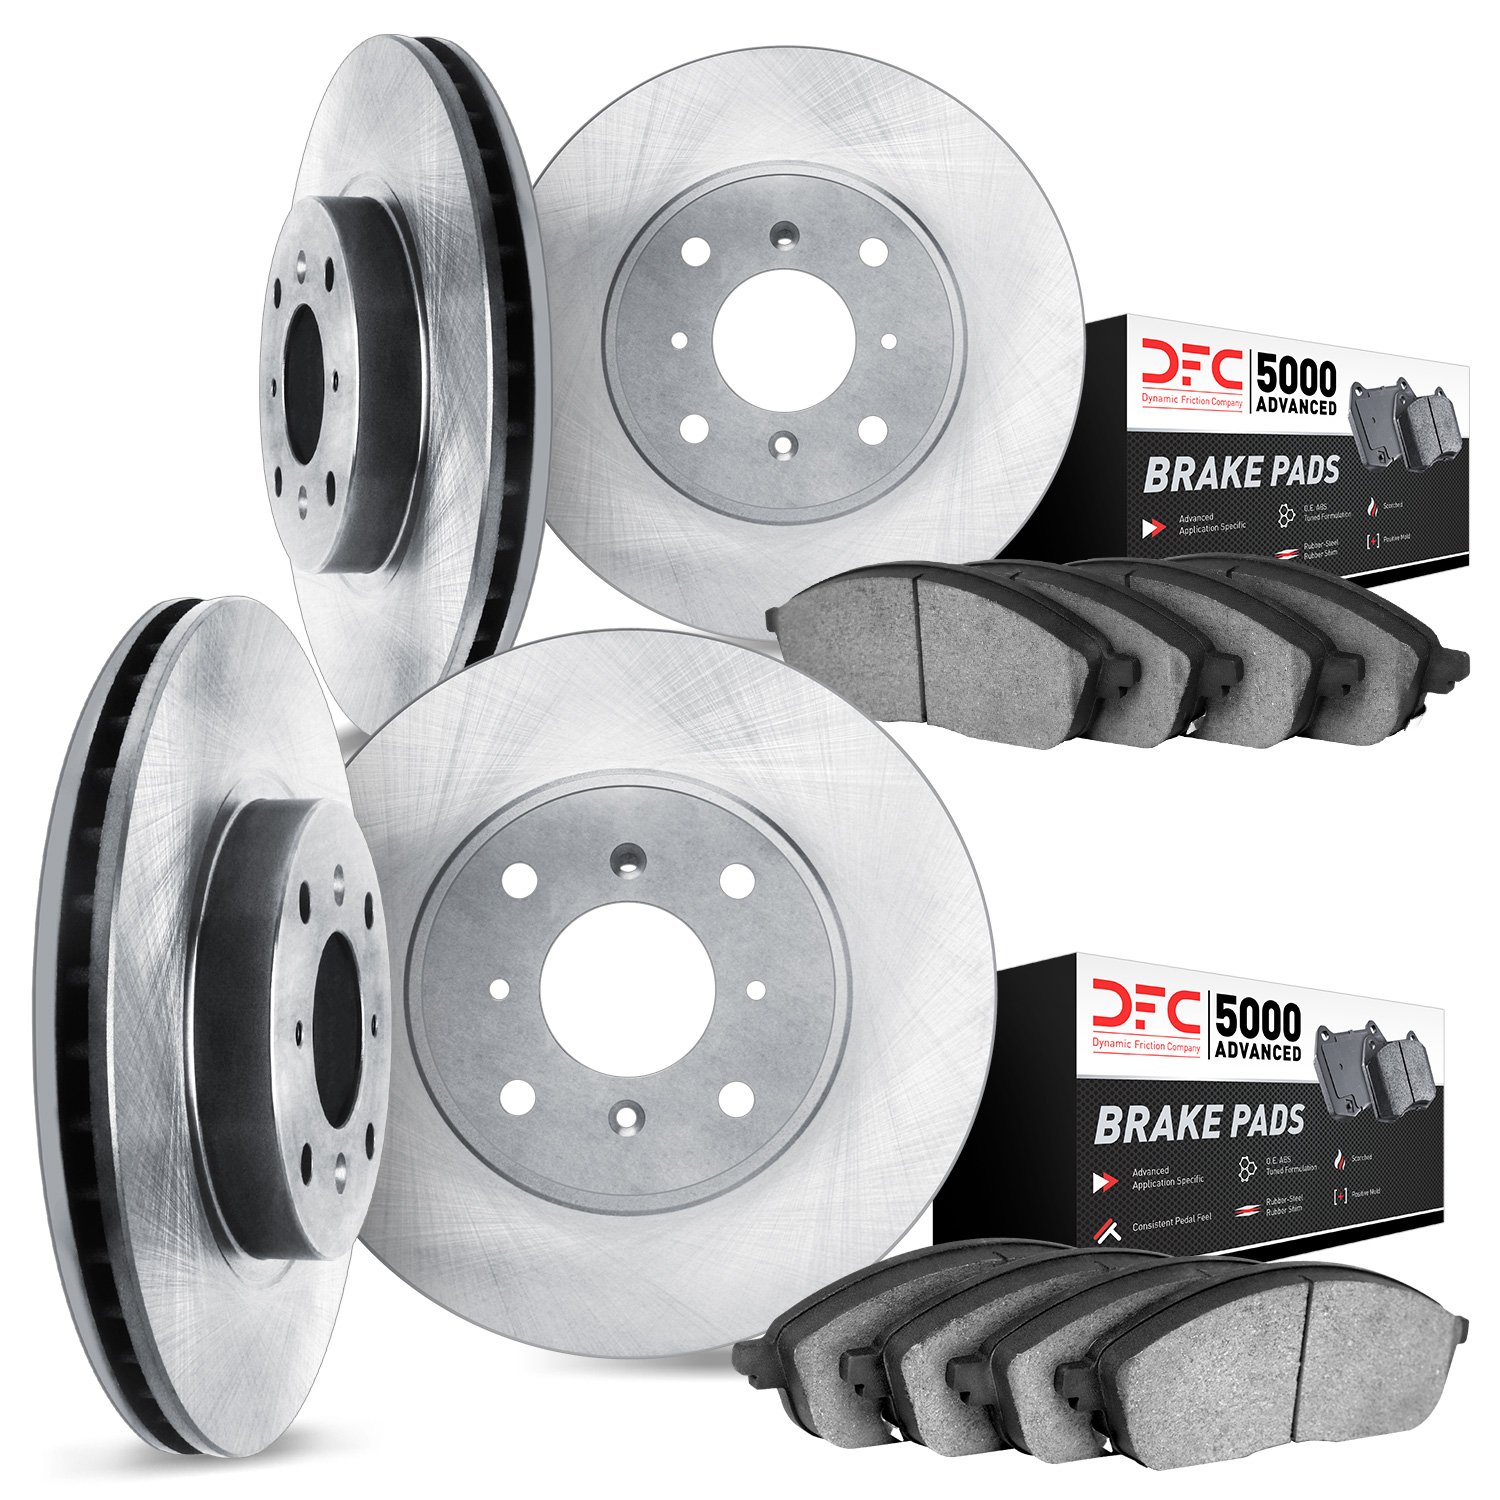 6504-56107 Brake Rotors w/5000 Advanced Brake Pads Kit, 1999-2000 Ford/Lincoln/Mercury/Mazda, Position: Front and Rear